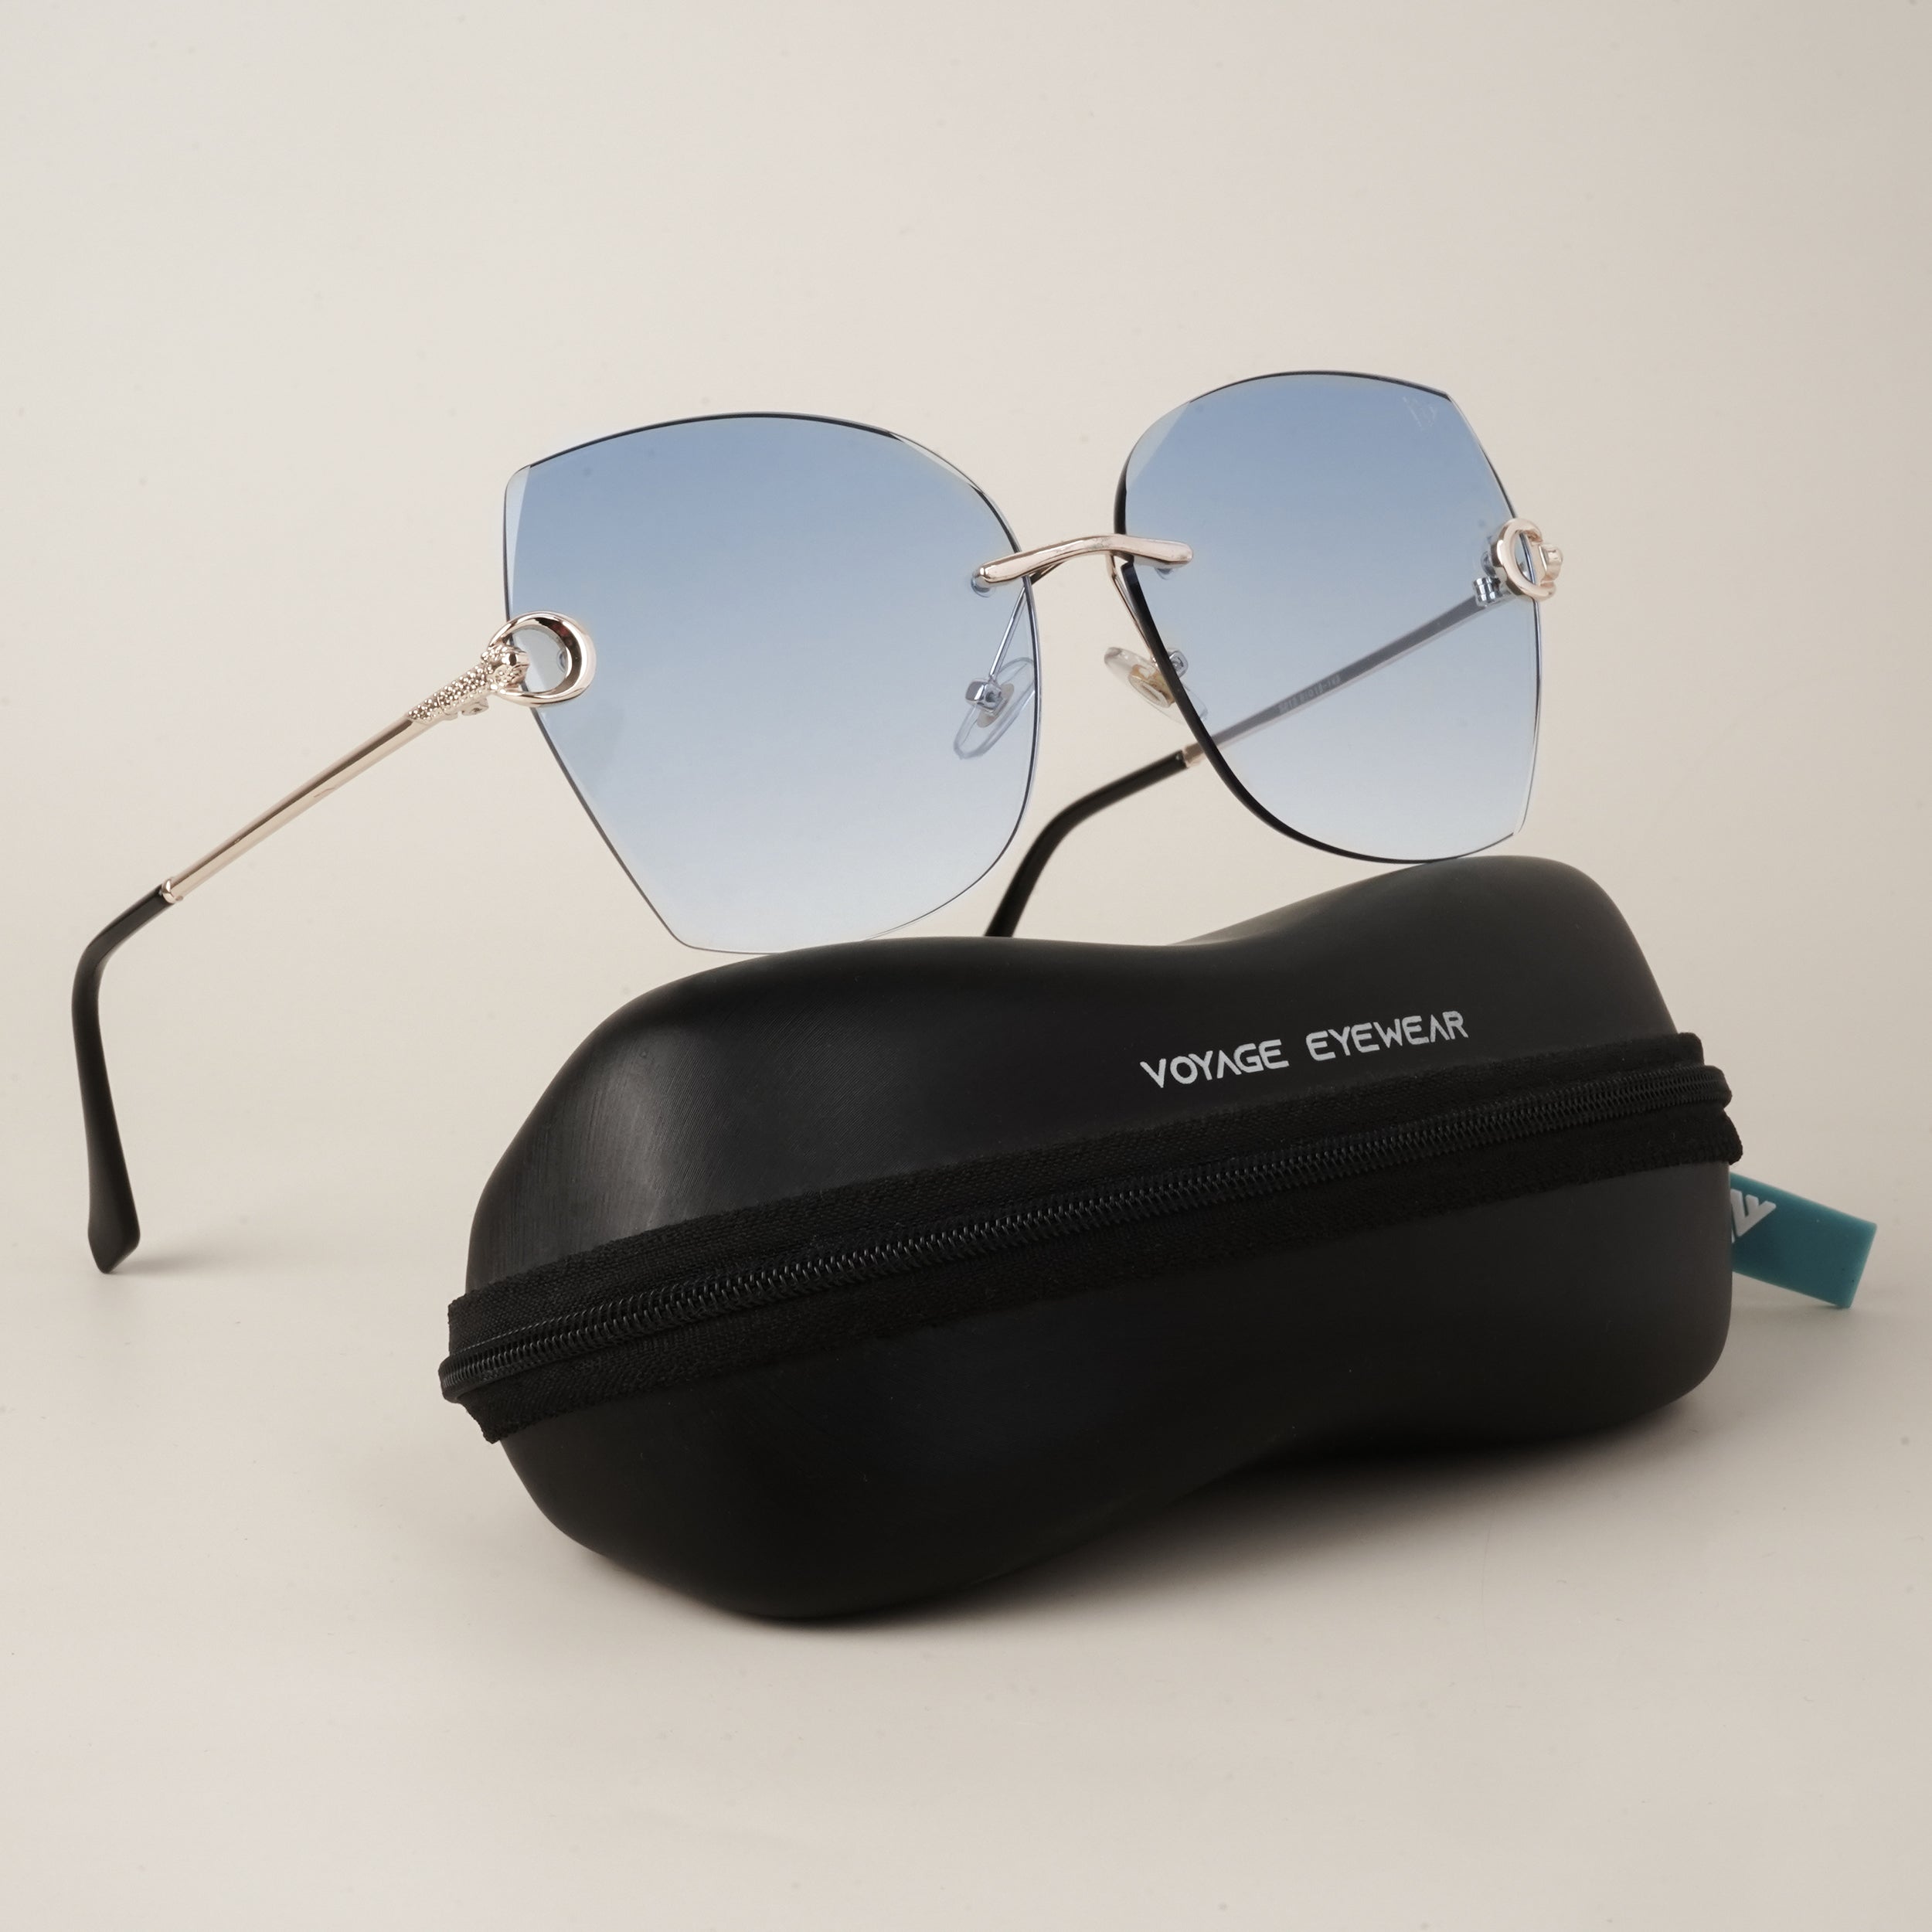 Voyage Blue Over Size Sunglasses - MG2880